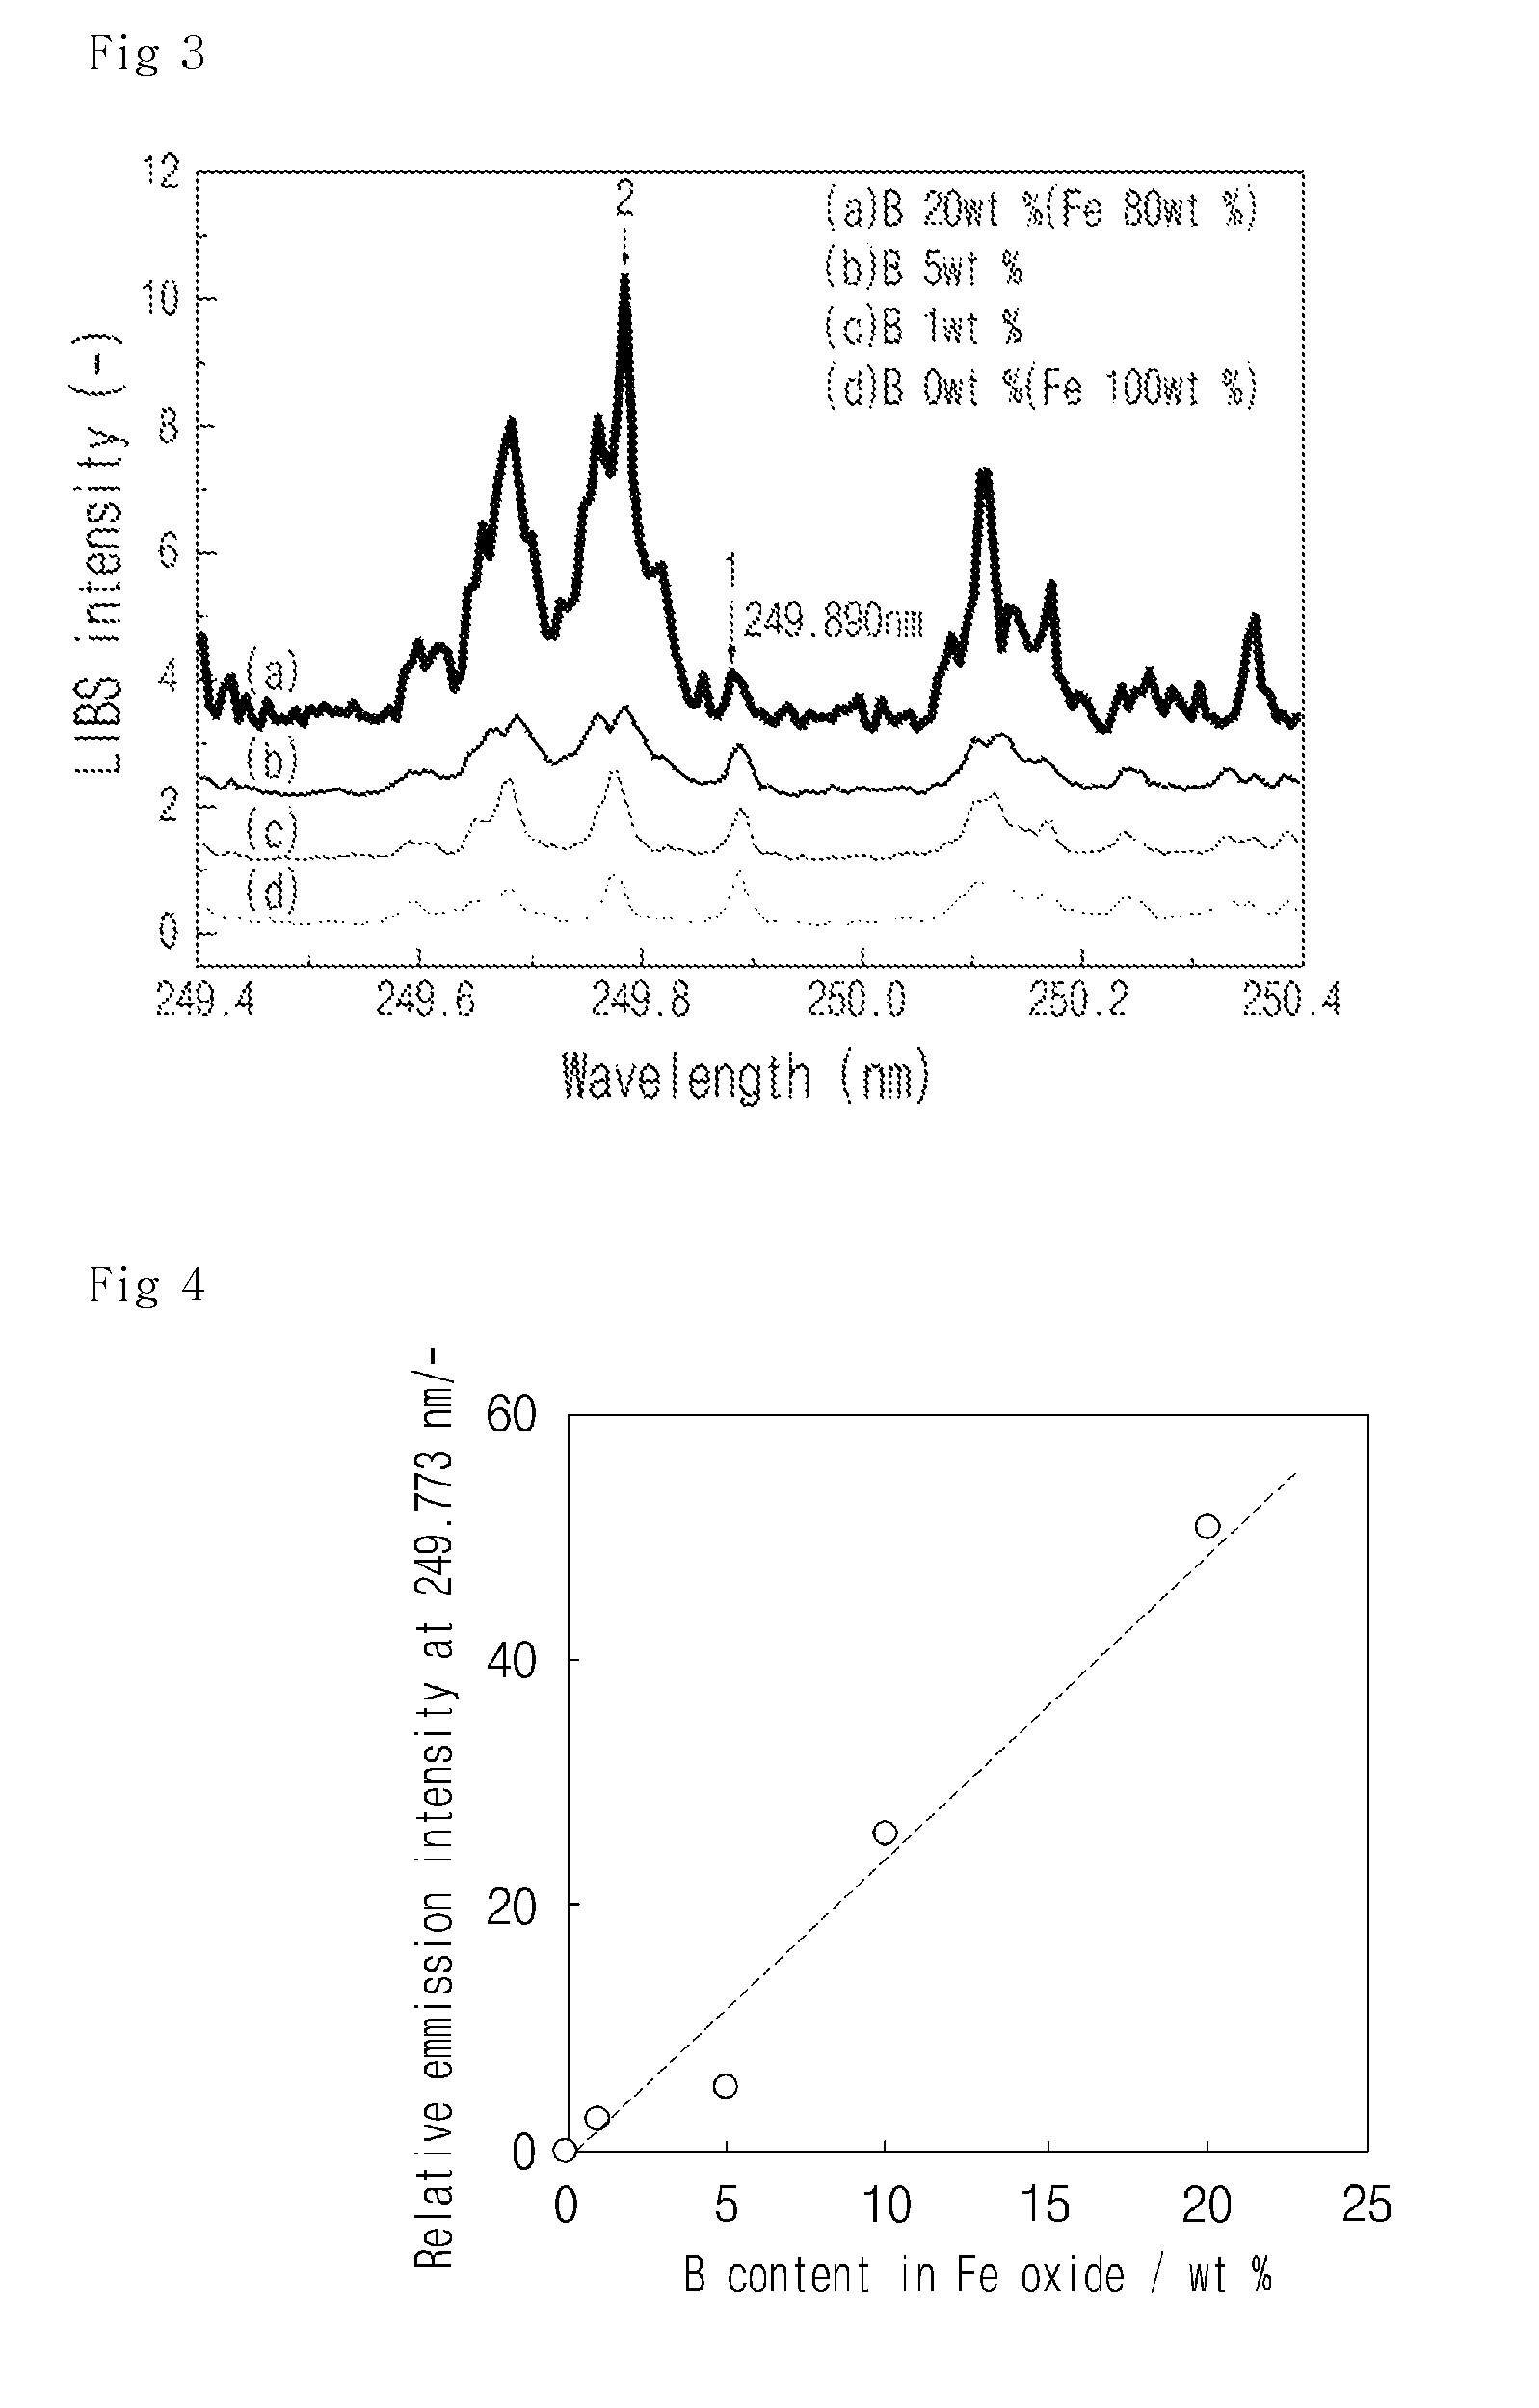 System and method for detecting leakage of nuclear reactor coolant using laser induced emission spectrum